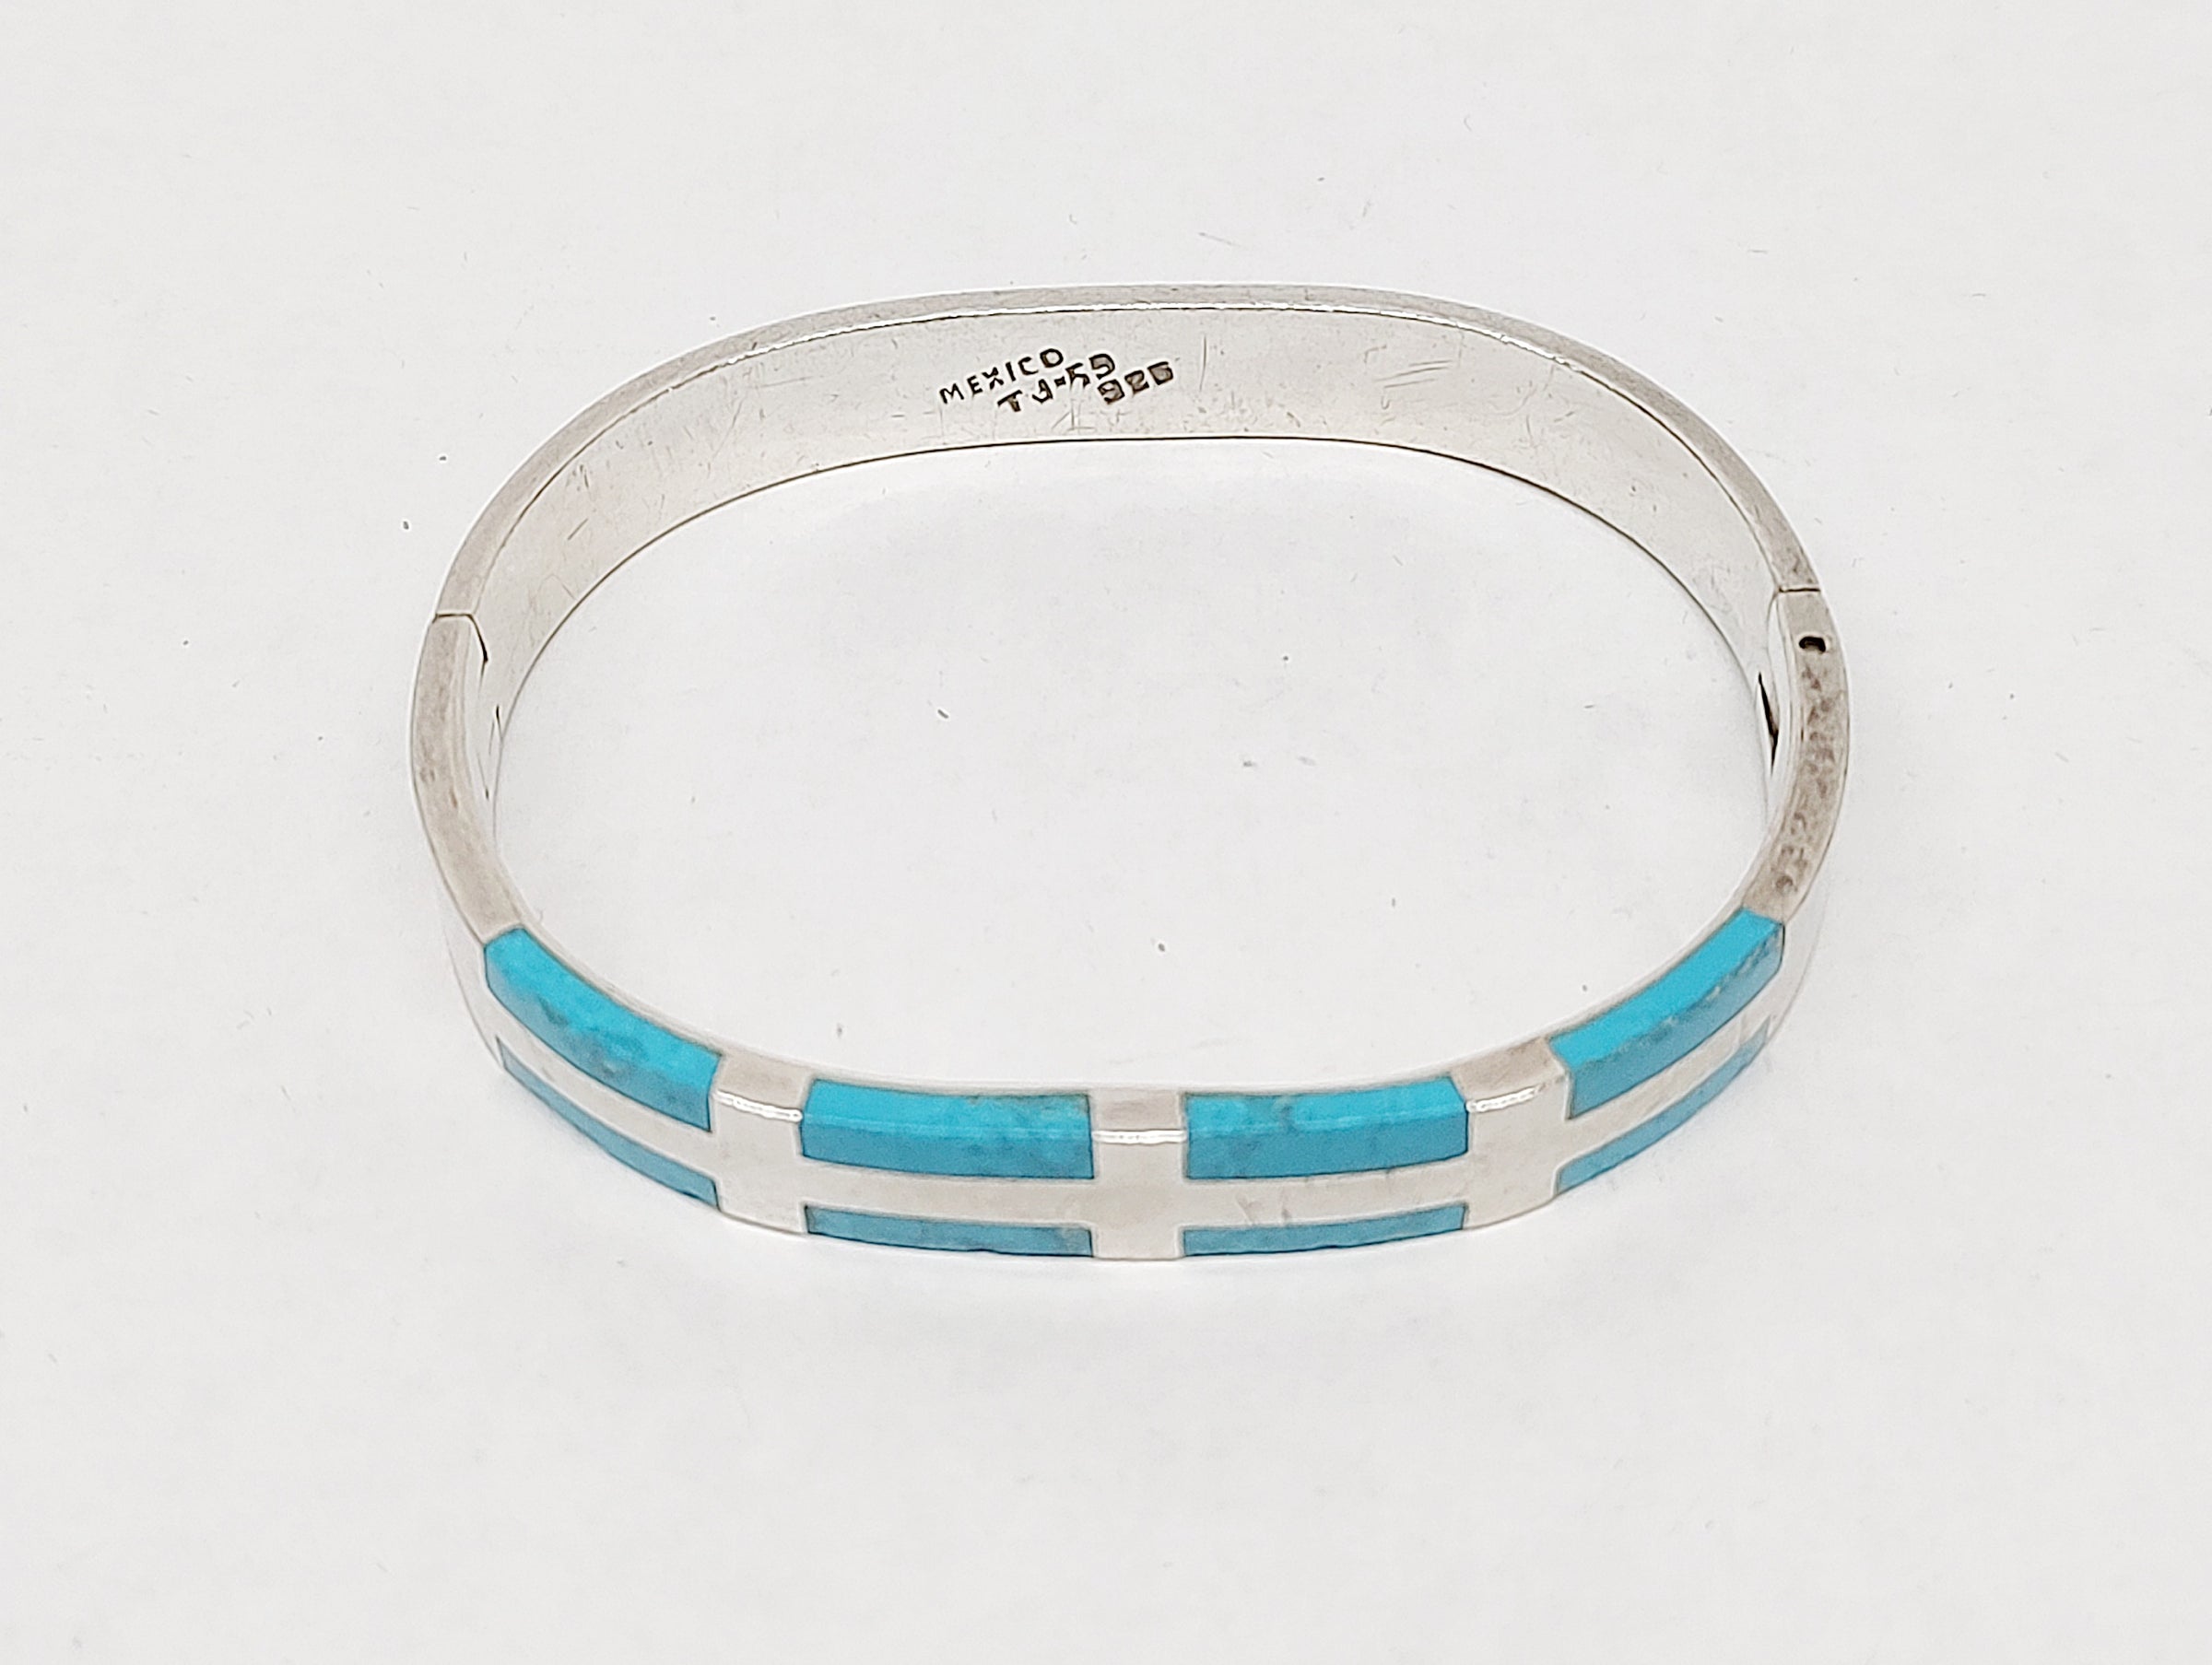 Turquoise .925 Sterling Silver Hinged Bangle Bracelet Mexico TJ-59